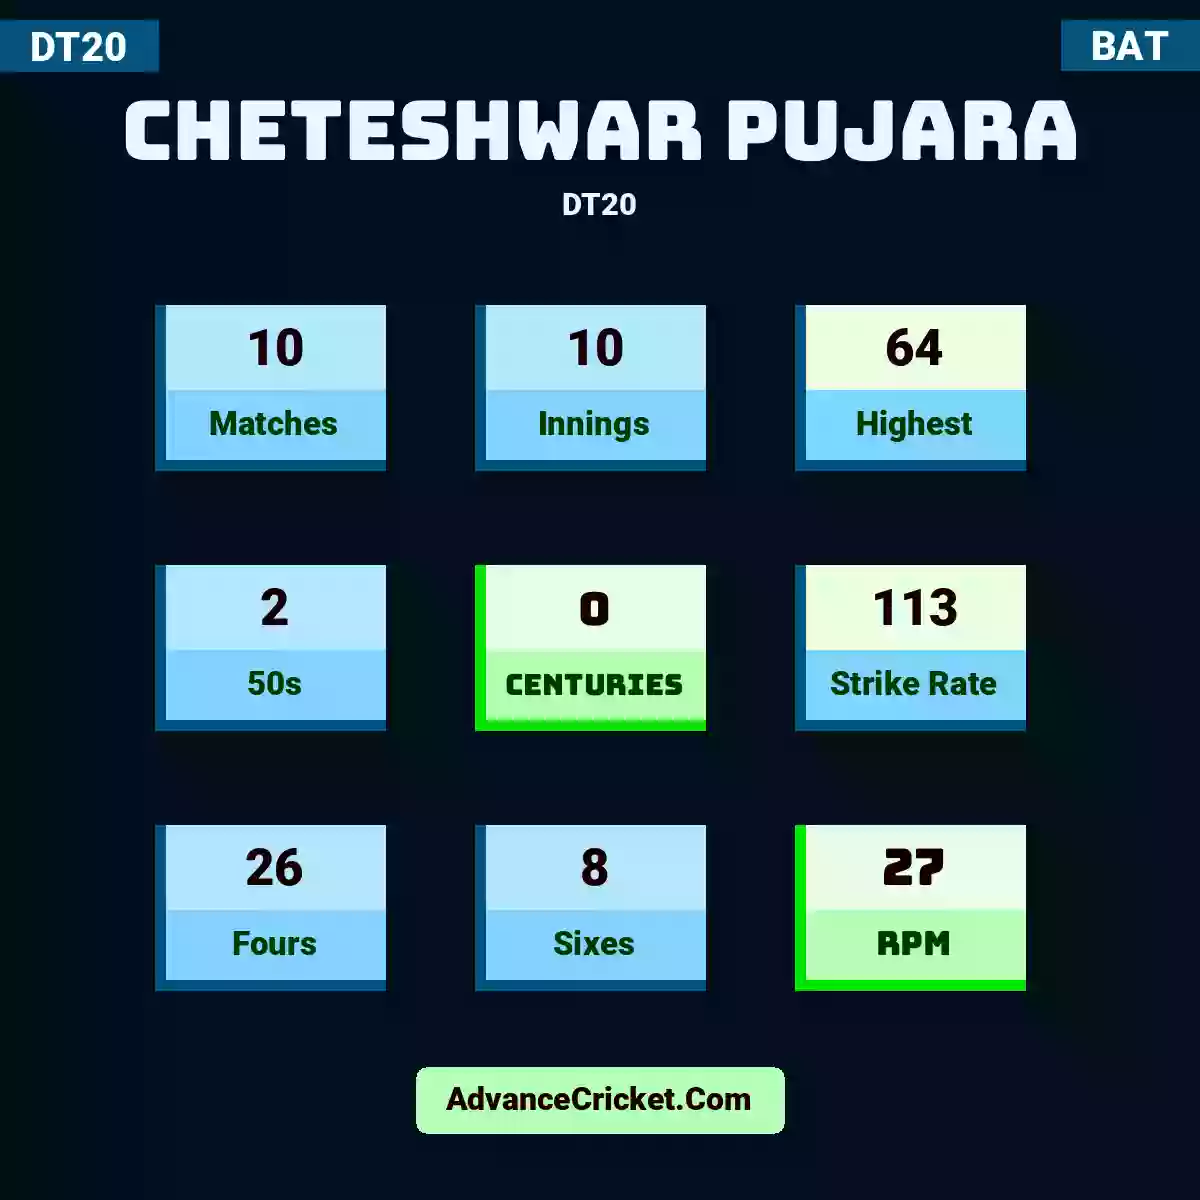 Cheteshwar Pujara DT20 , Cheteshwar Pujara played 10 matches, scored 64 runs as highest, 2 half-centuries, and 0 centuries, with a strike rate of 113. C.Pujara hit 26 fours and 8 sixes, with an RPM of 27.